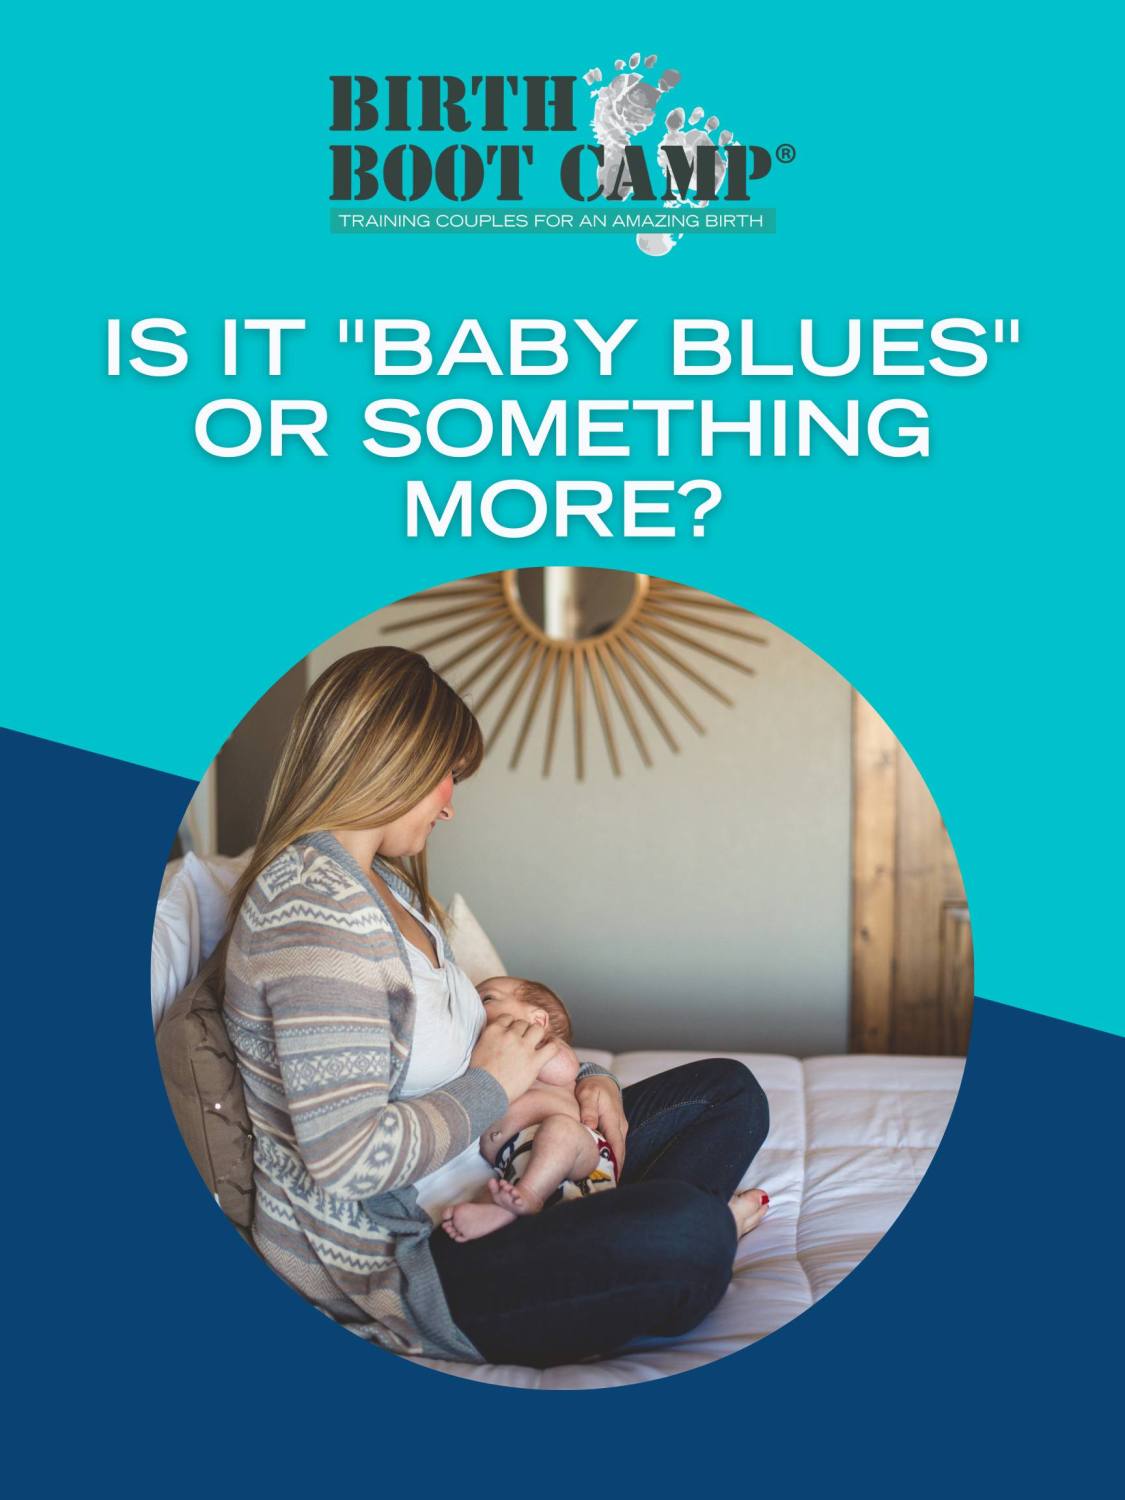 Is it “Baby Blues” or something more?